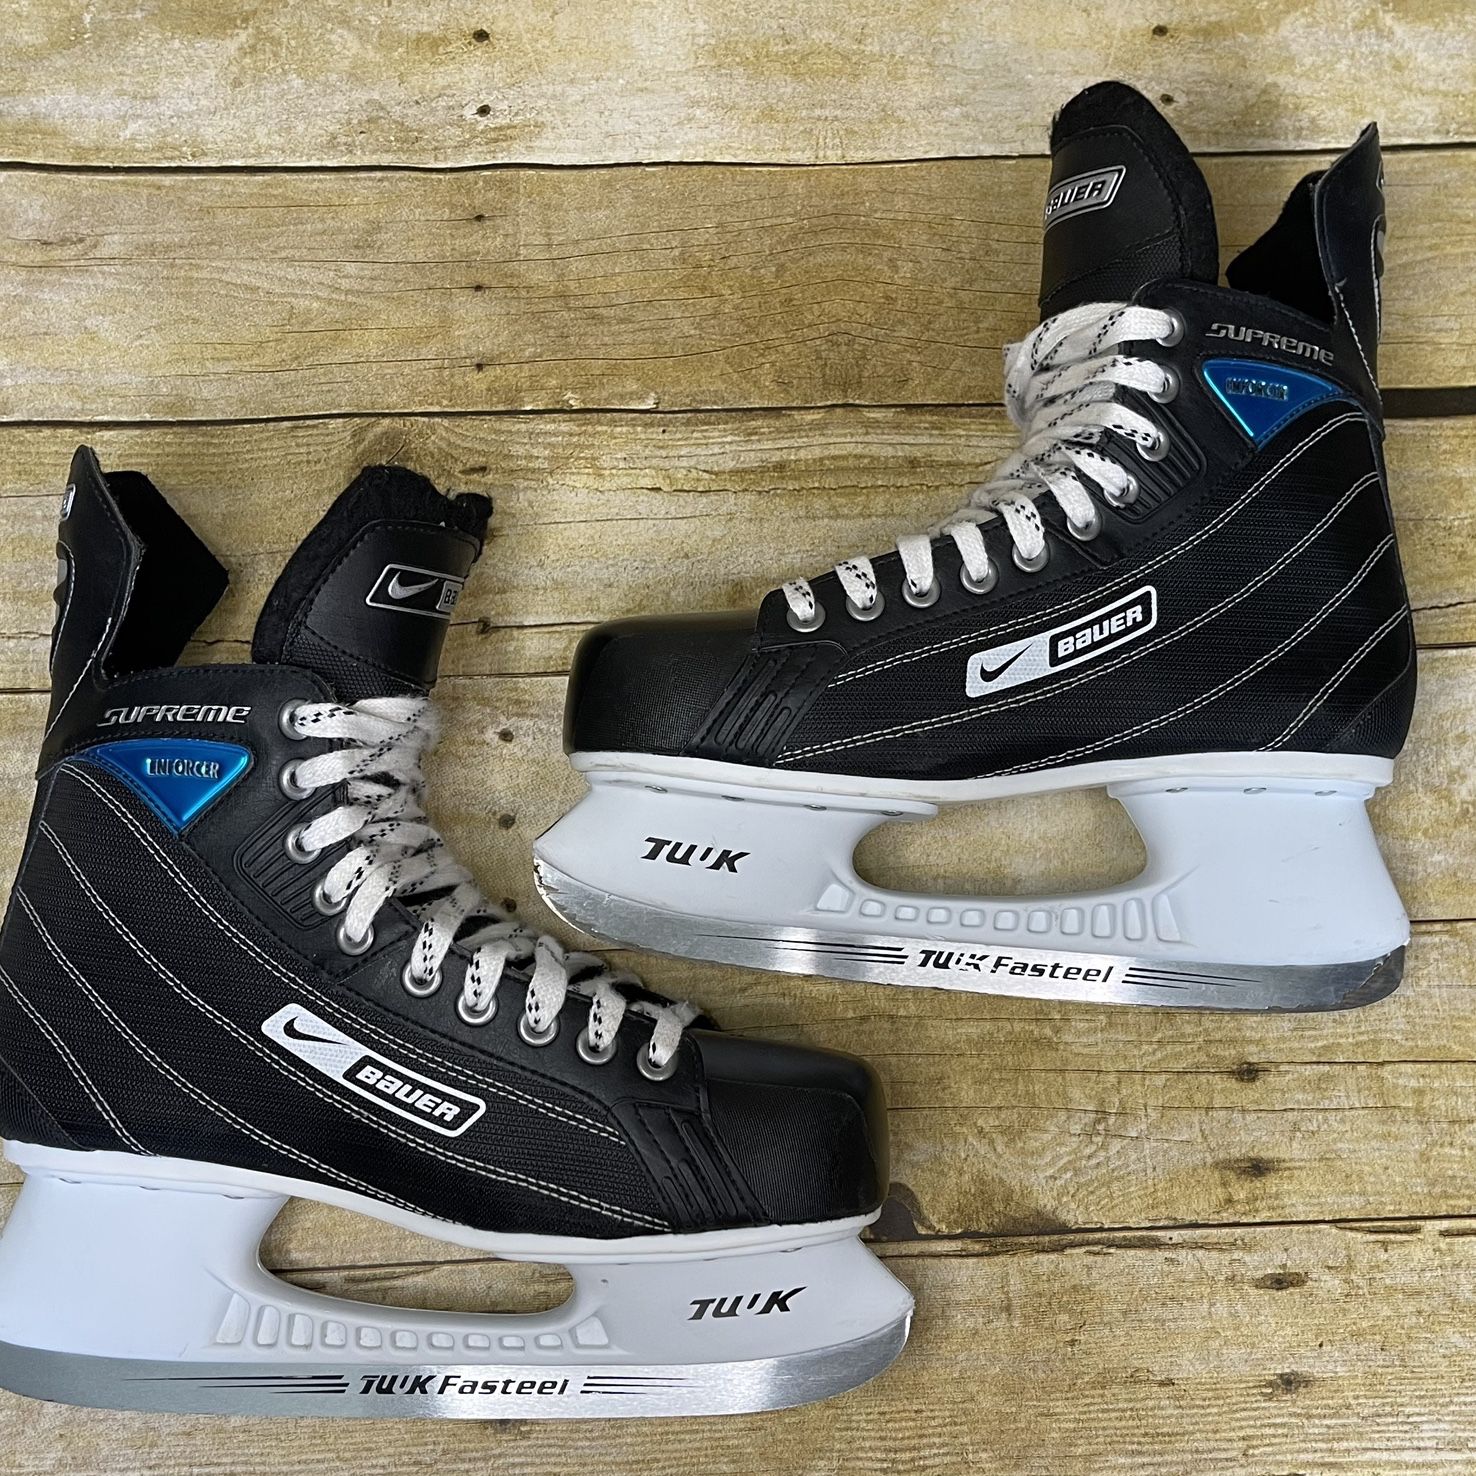 Nike hockey skates for Sale in Staten Island, NY - OfferUp